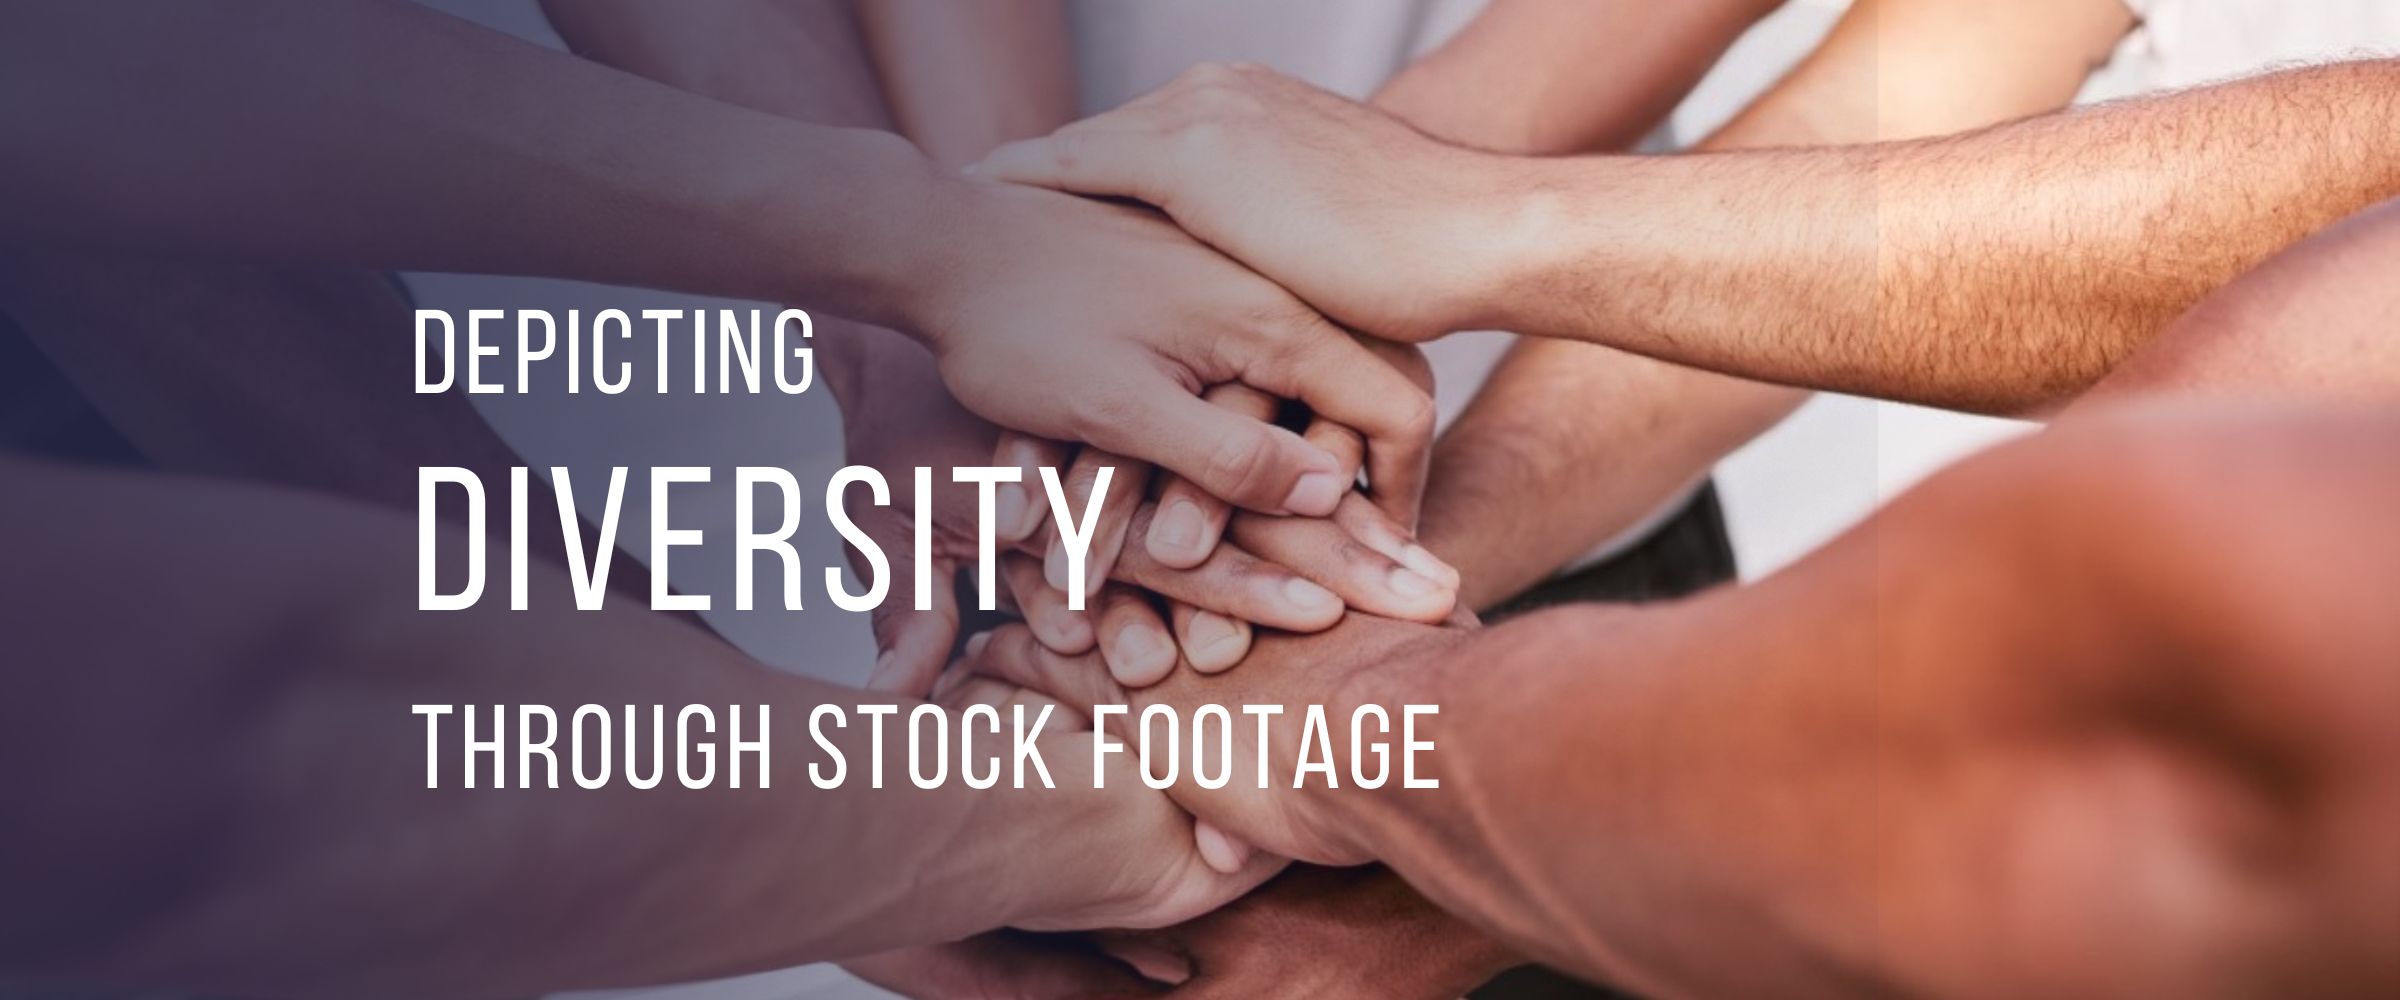 Impact of Stock Footage on Depiction of Diversity 